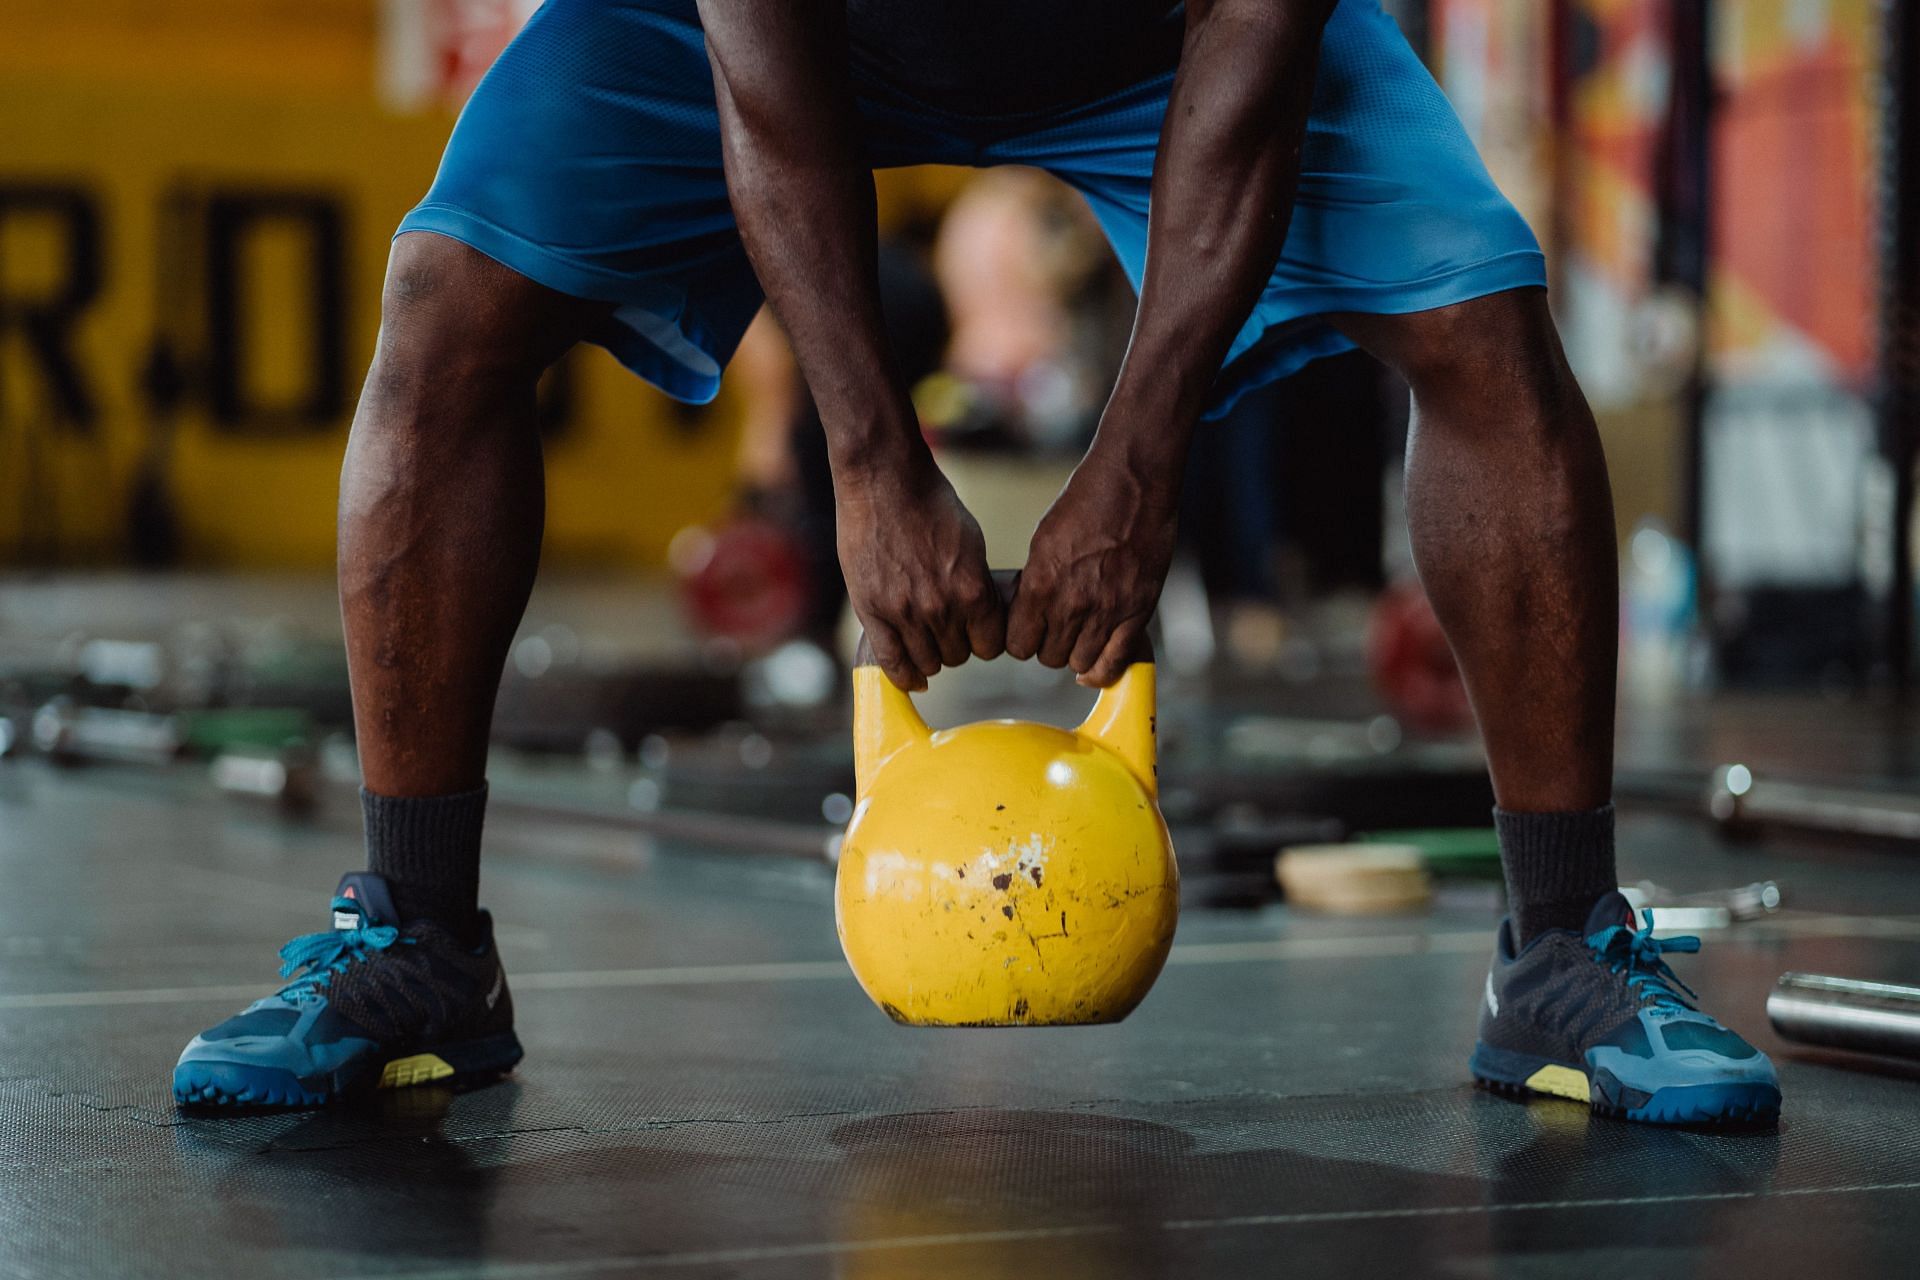 Kettlebell deadlifts are a great exercise for your back, glutes, and core! (Image via pexels/Ketut Subiyanto)